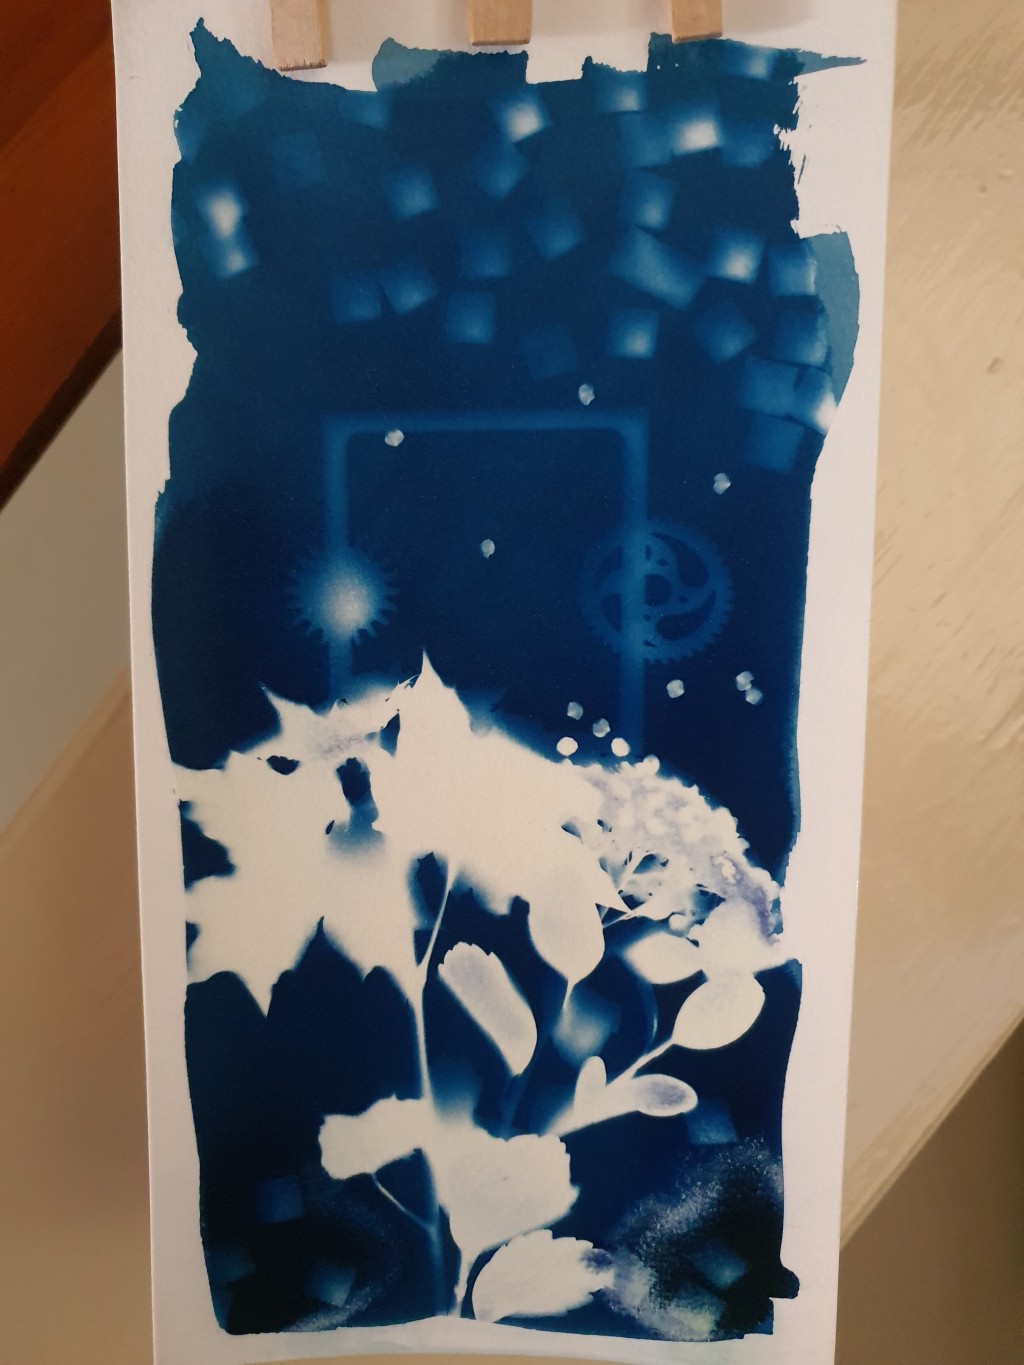 The Cyanotype Composition